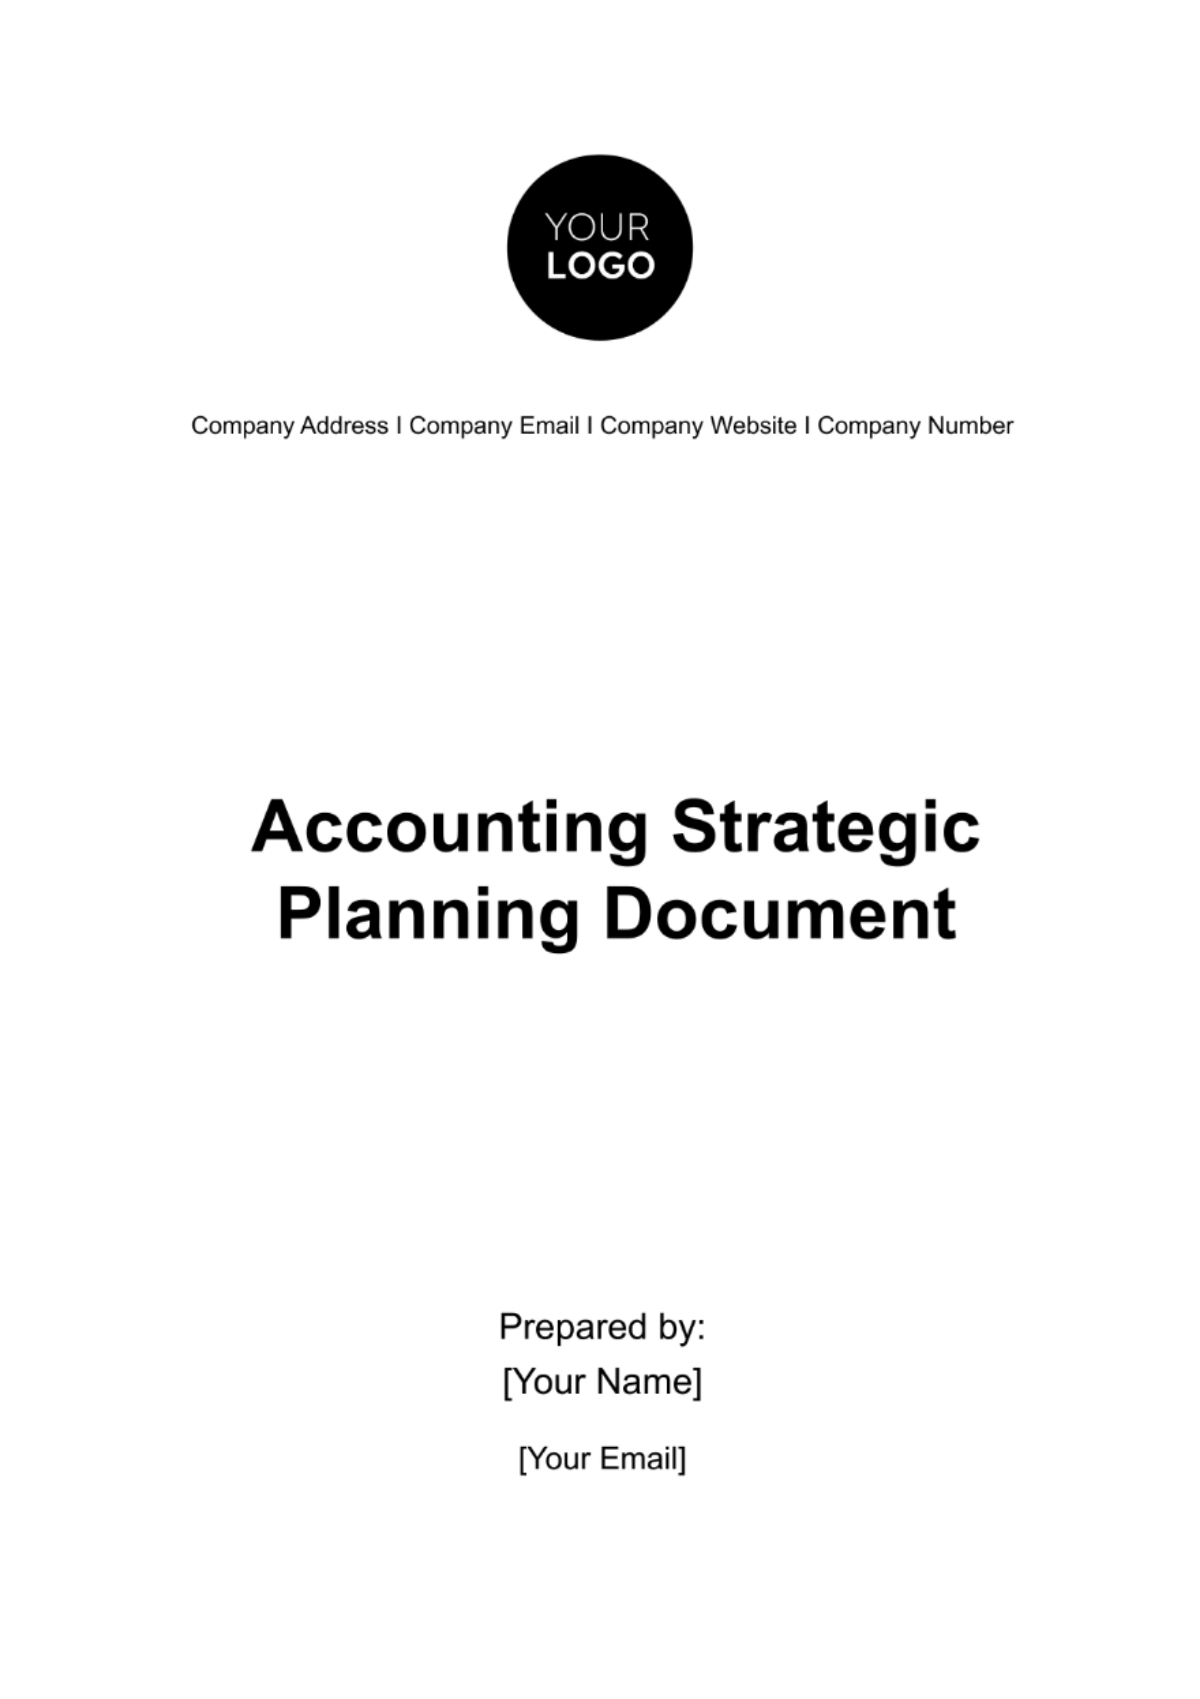 Accounting Strategic Planning Document Template